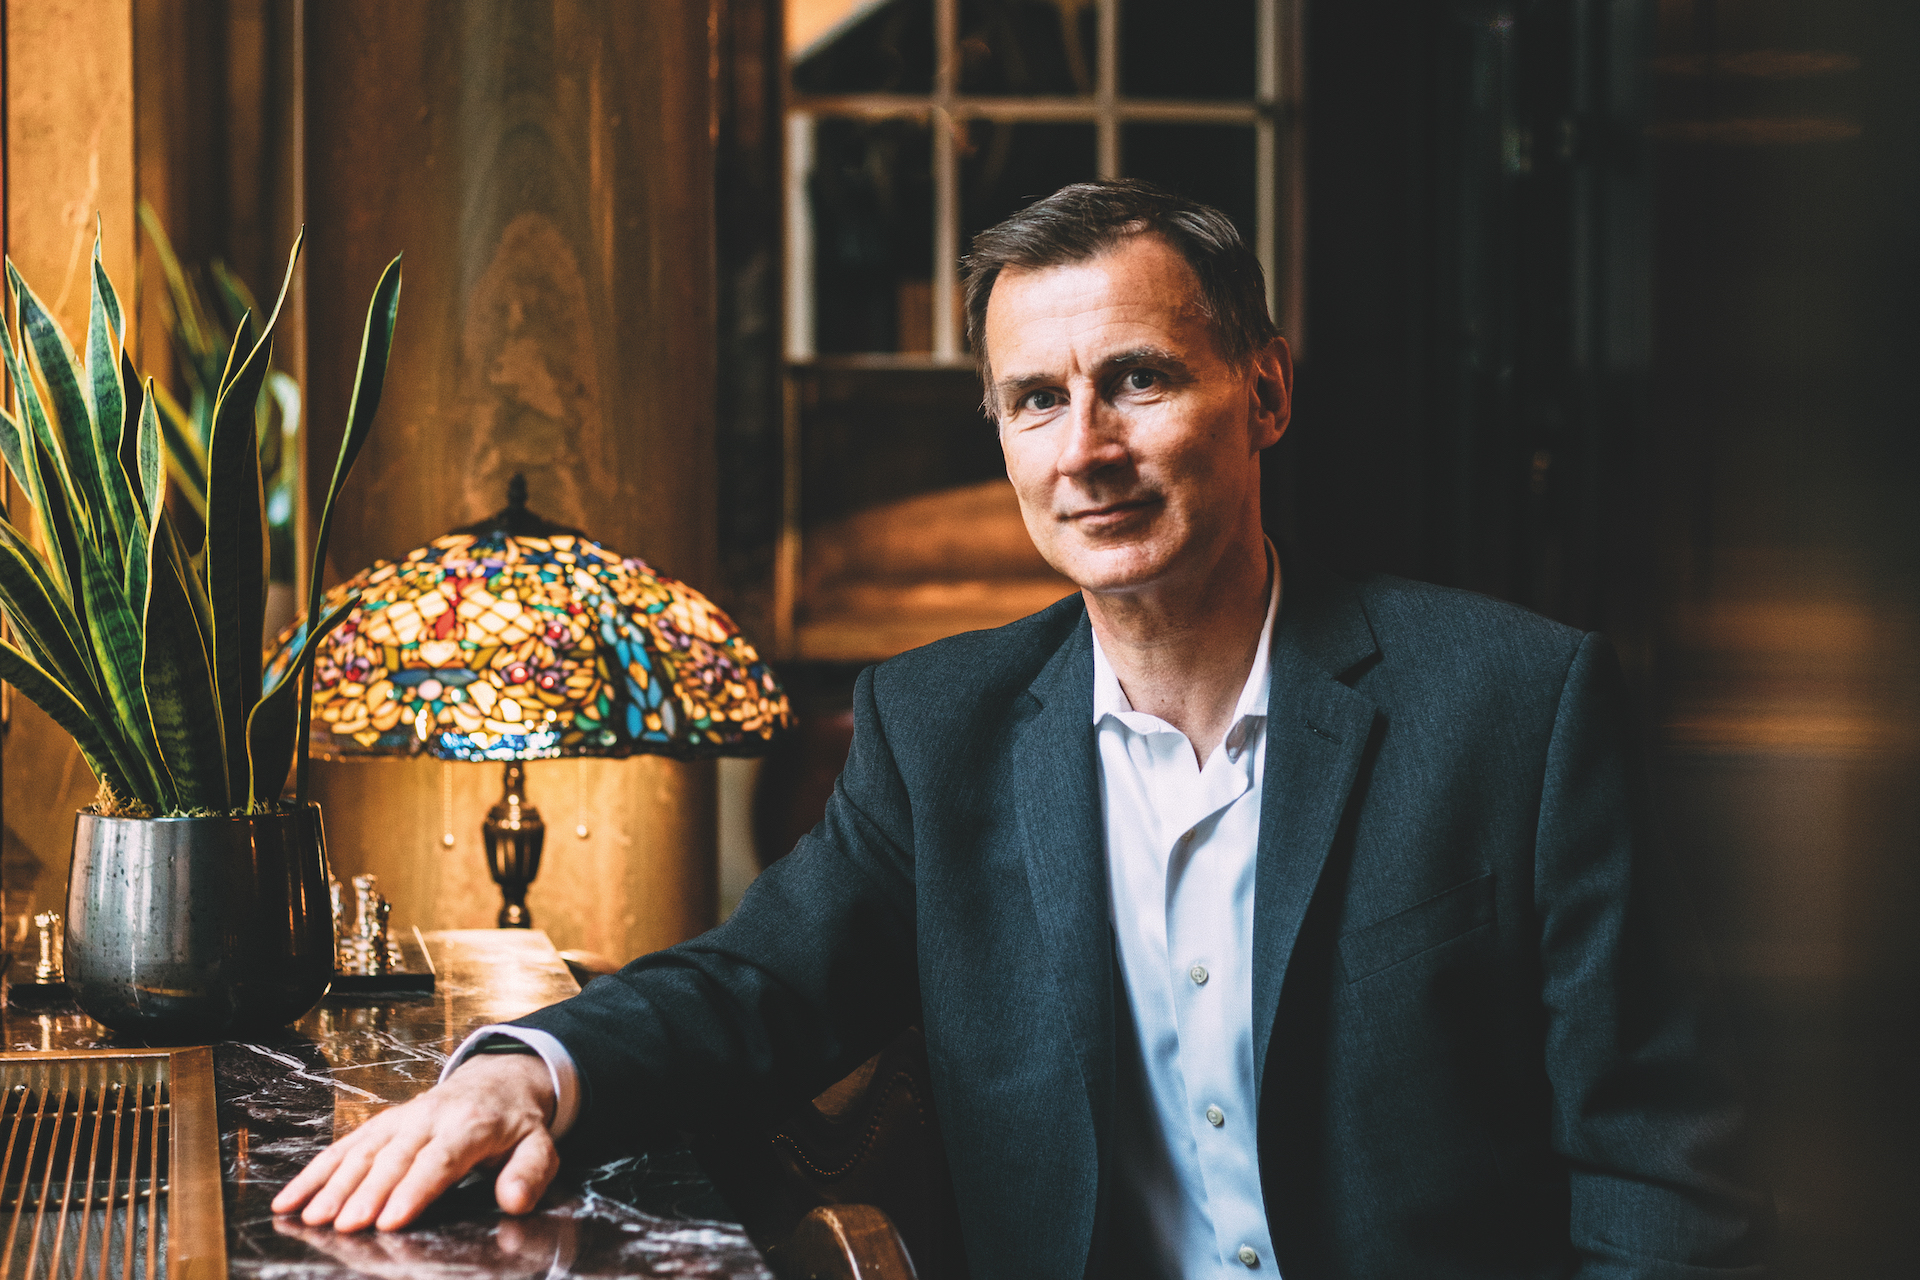 Conversations at Scarfes Bar: Jeremy Hunt, Chancellor of the Exchequer